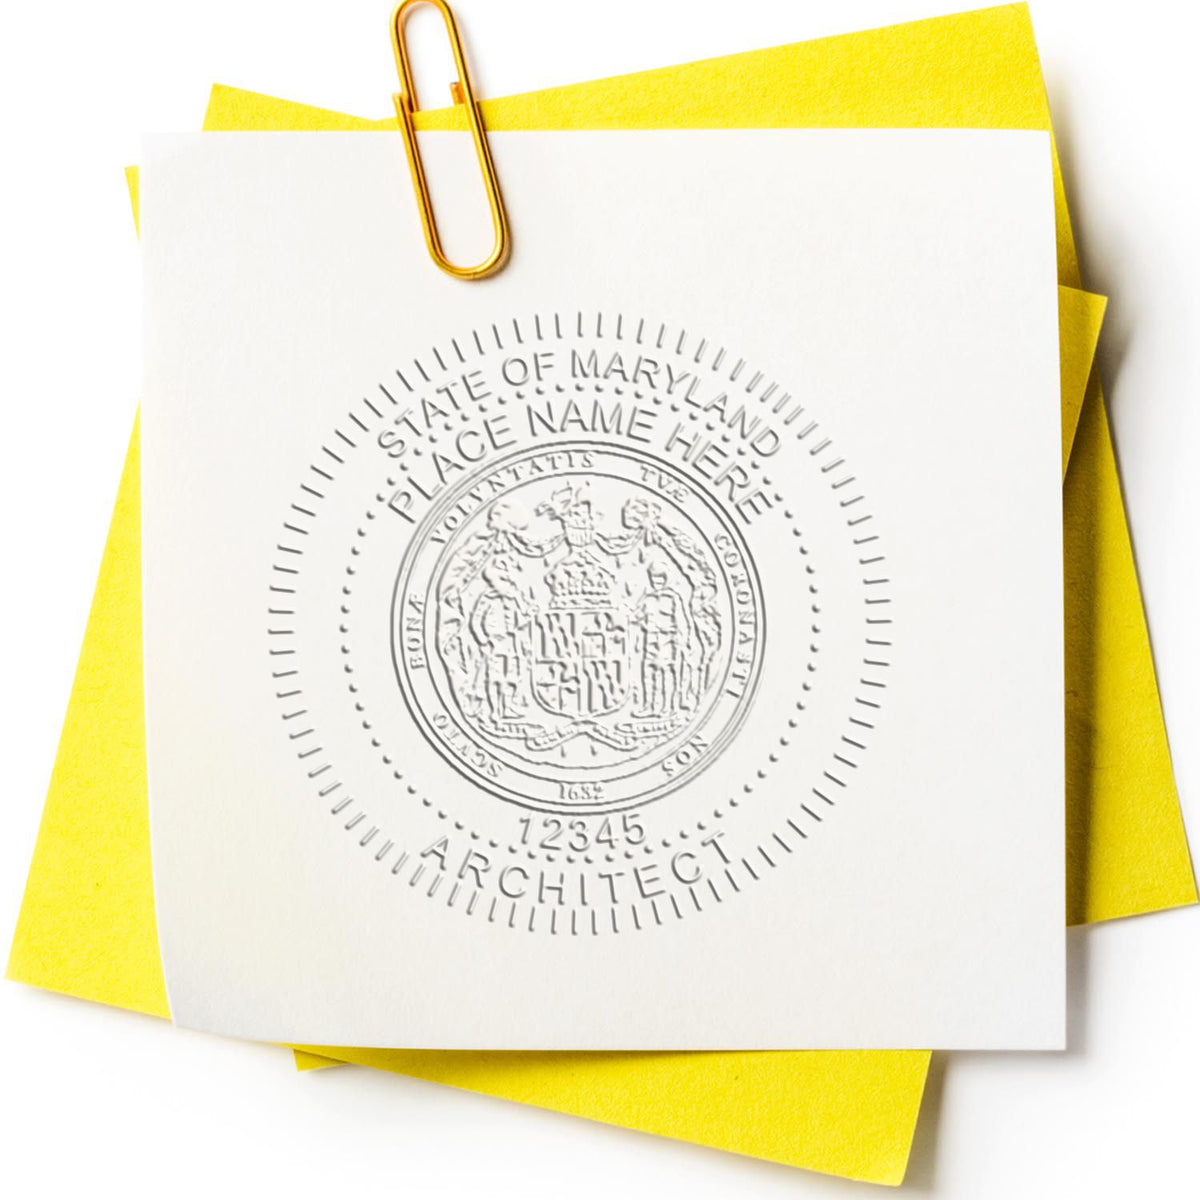 An alternative view of the State of Maryland Long Reach Architectural Embossing Seal stamped on a sheet of paper showing the image in use